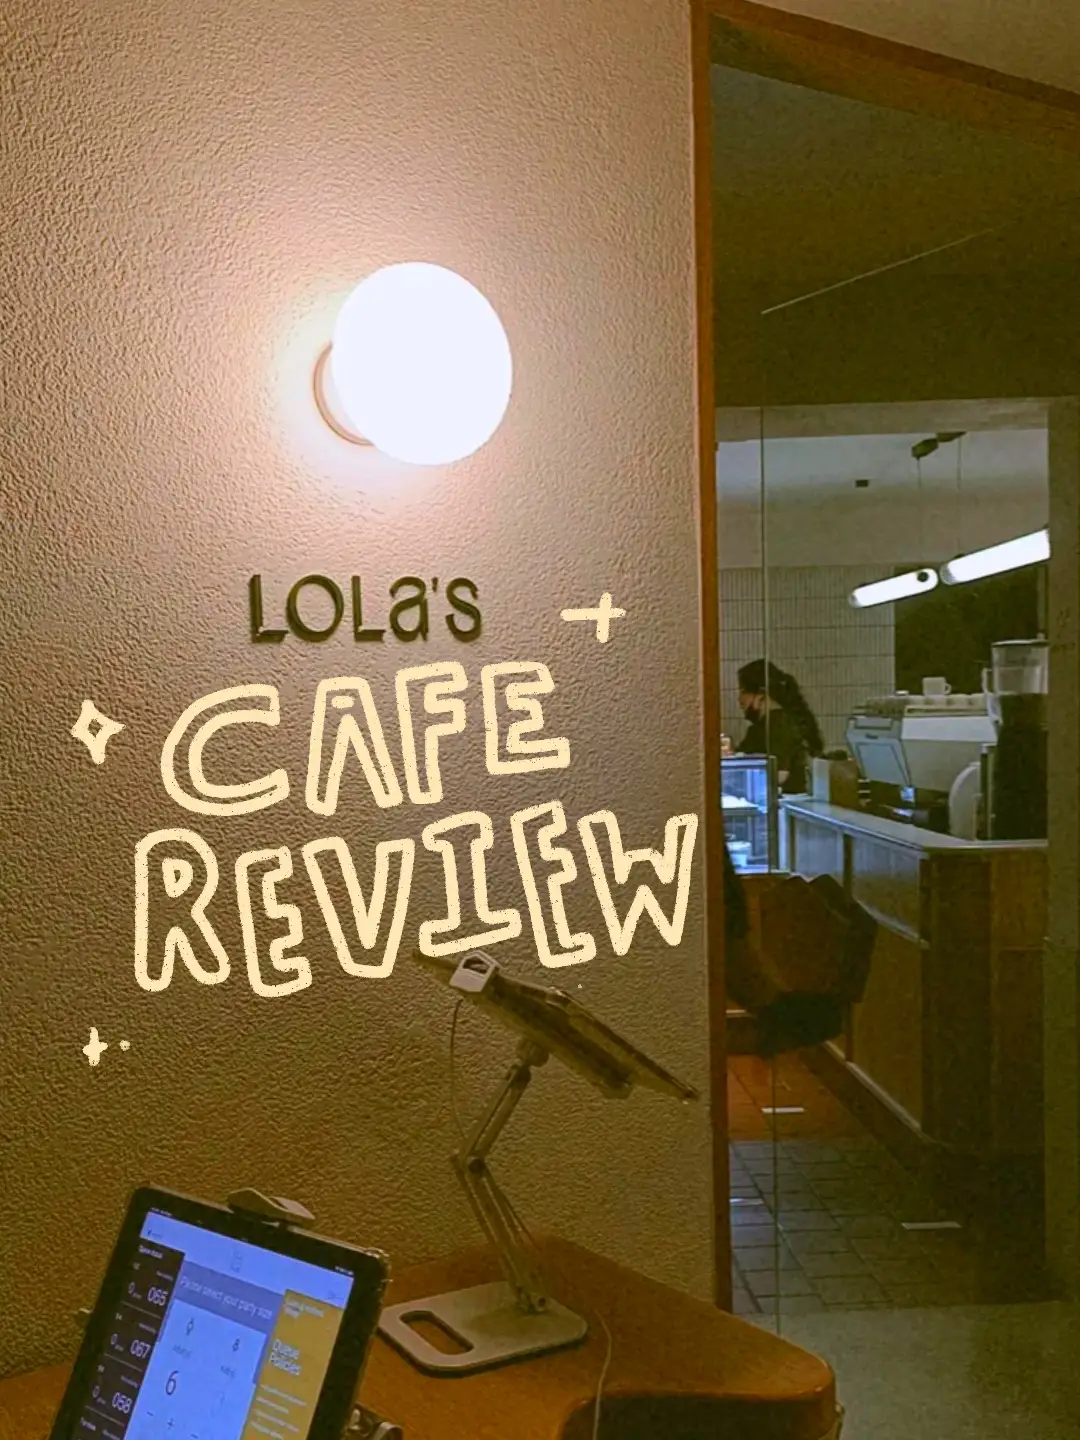 LOLA OR NO LAH? CAFE FOOD REVIEW 's images